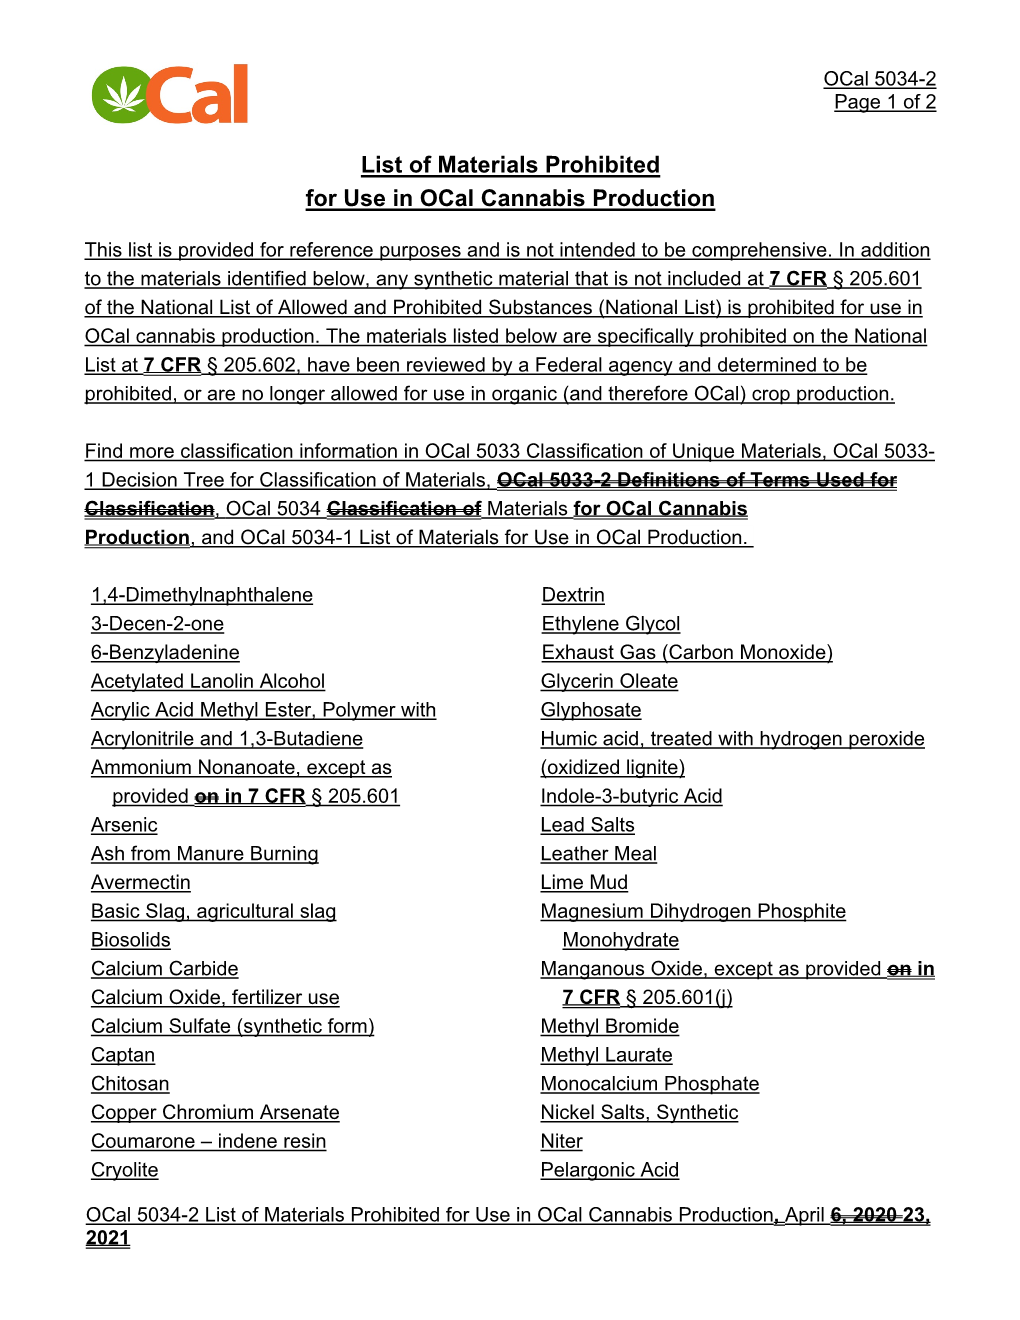 Ocal 5034-2 List of Materials Prohibited for Use in Ocal Cannabis Production, April 6, 2020 23, 2021 Ocal 5034-2 Page 2 of 2